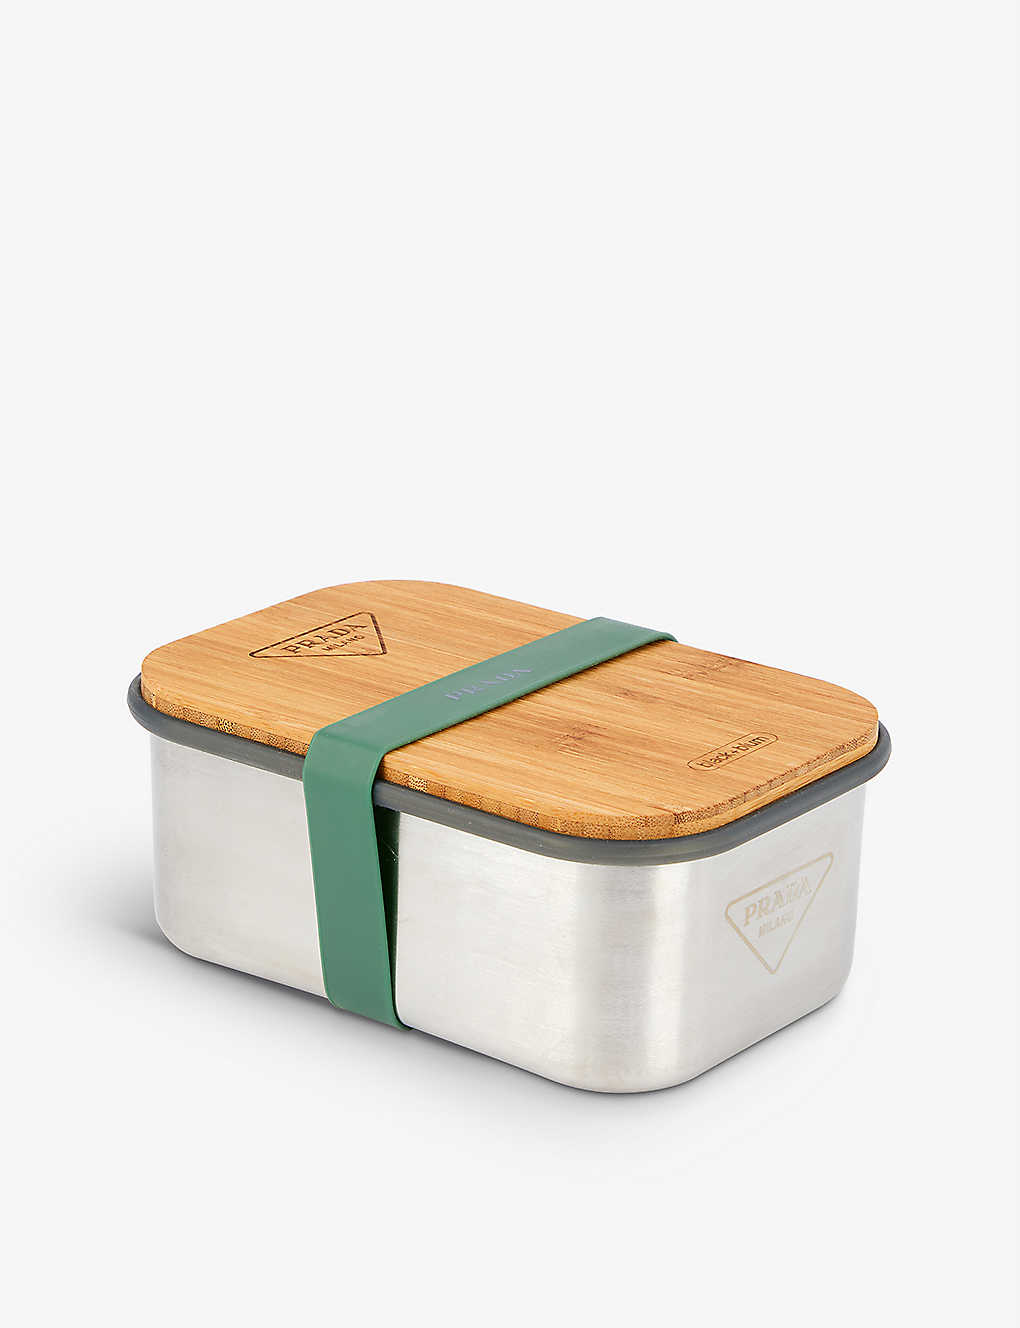 Prada x Black+Blum stainless-steel, bamboo and silicone lunch box(9210780)